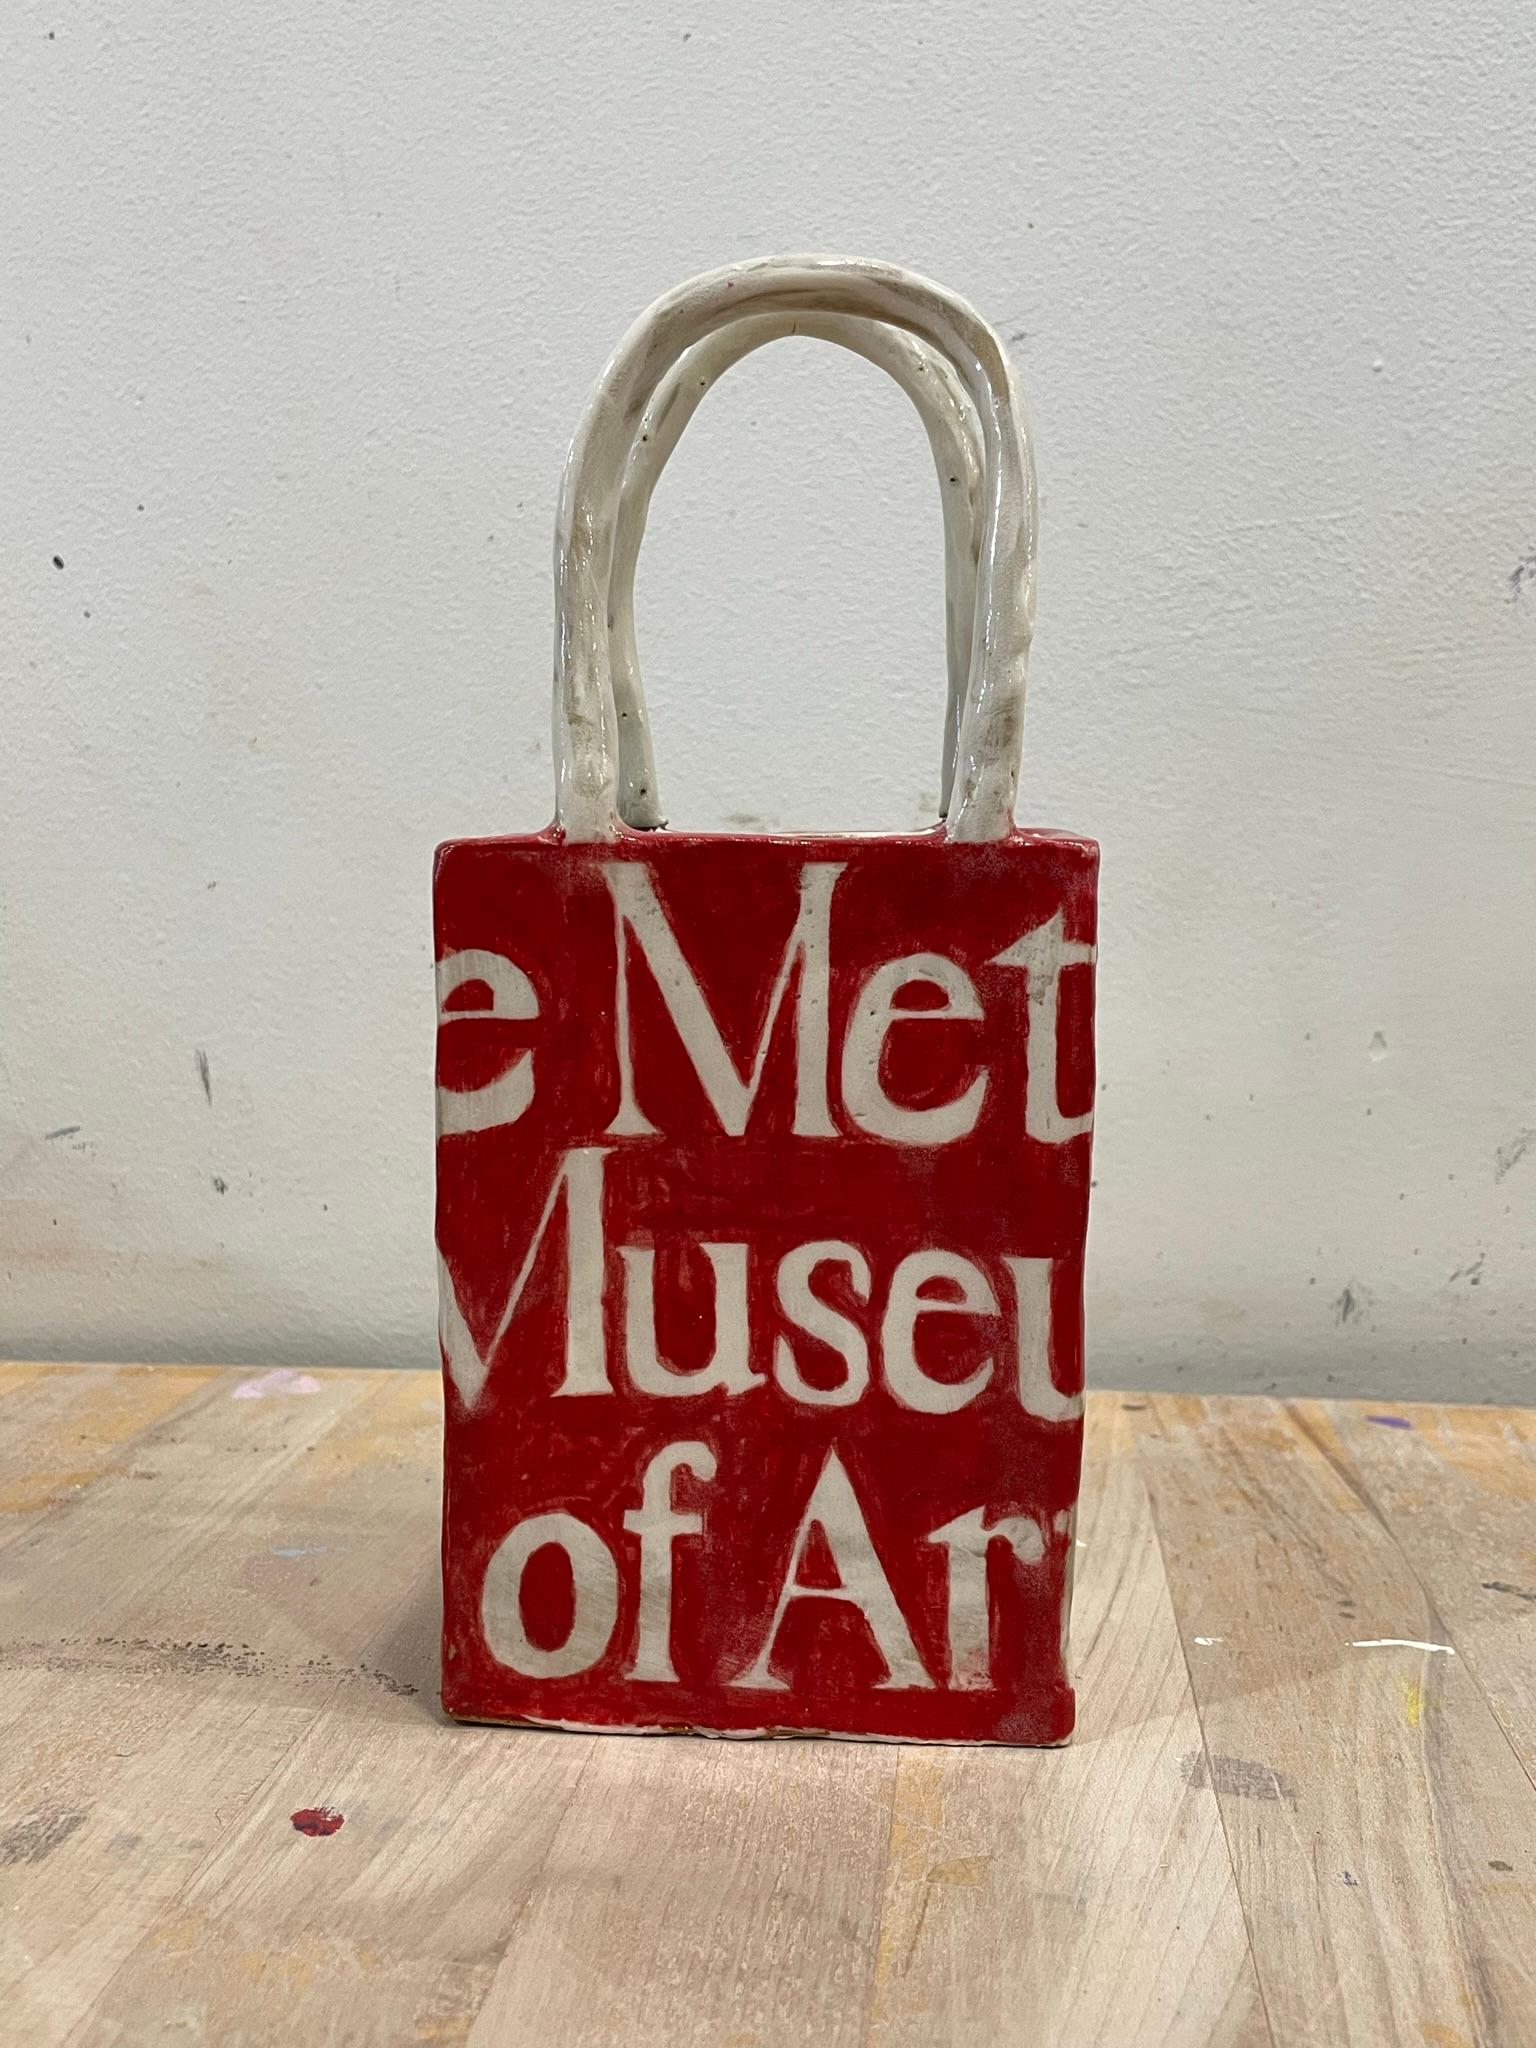 An homage to the iconic museum, this ceramic vessel creates a pop of color and invokes a sense of NYC nostalgia. It can be used as a vase, a penholder, or a decorative accent for any shelf or table. It is sealed with glaze and therefore waterproof.